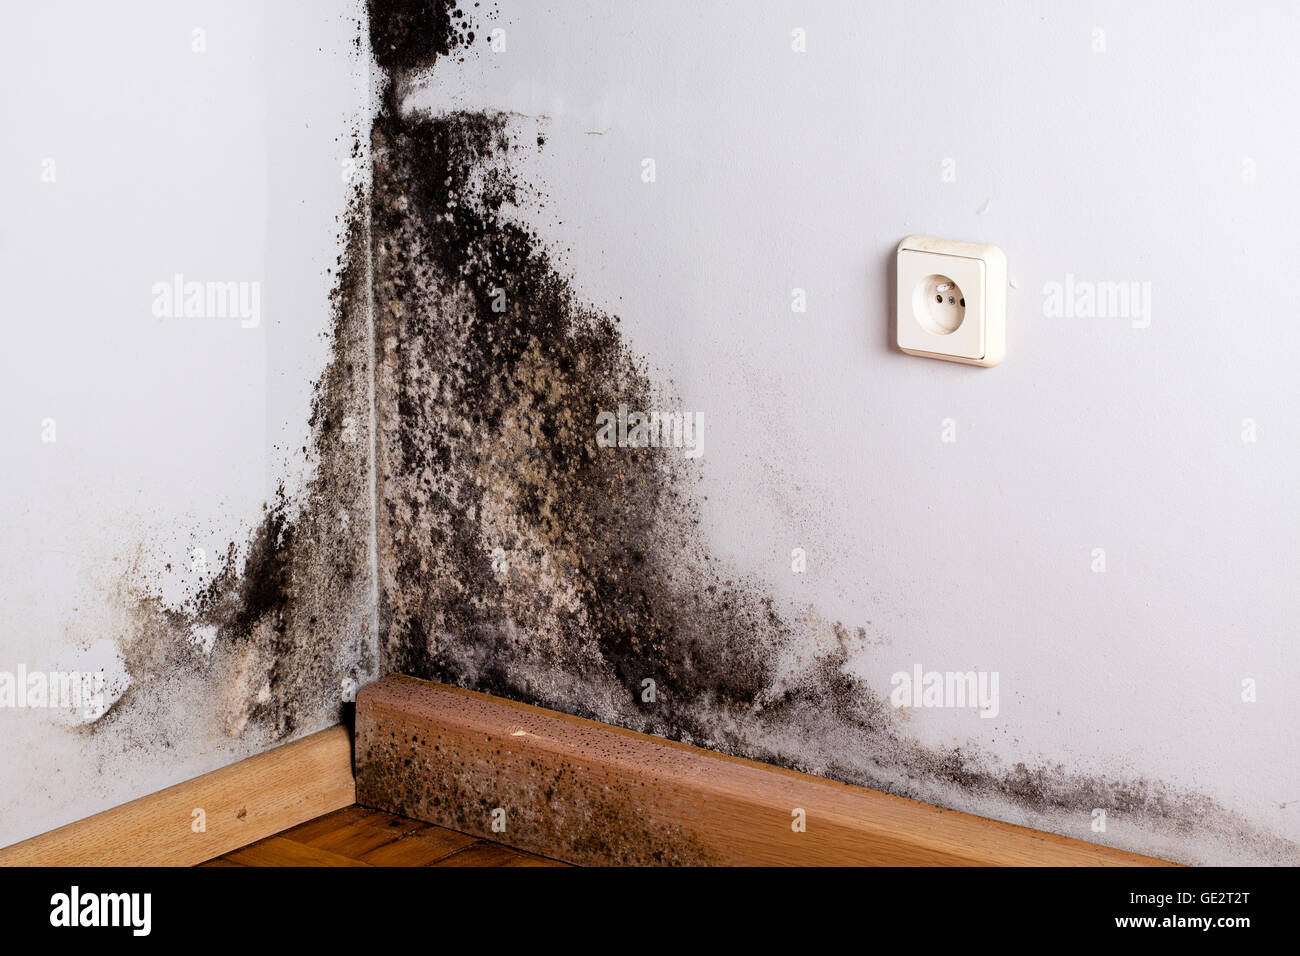 Black mold in the corner of room wall Stock Photo